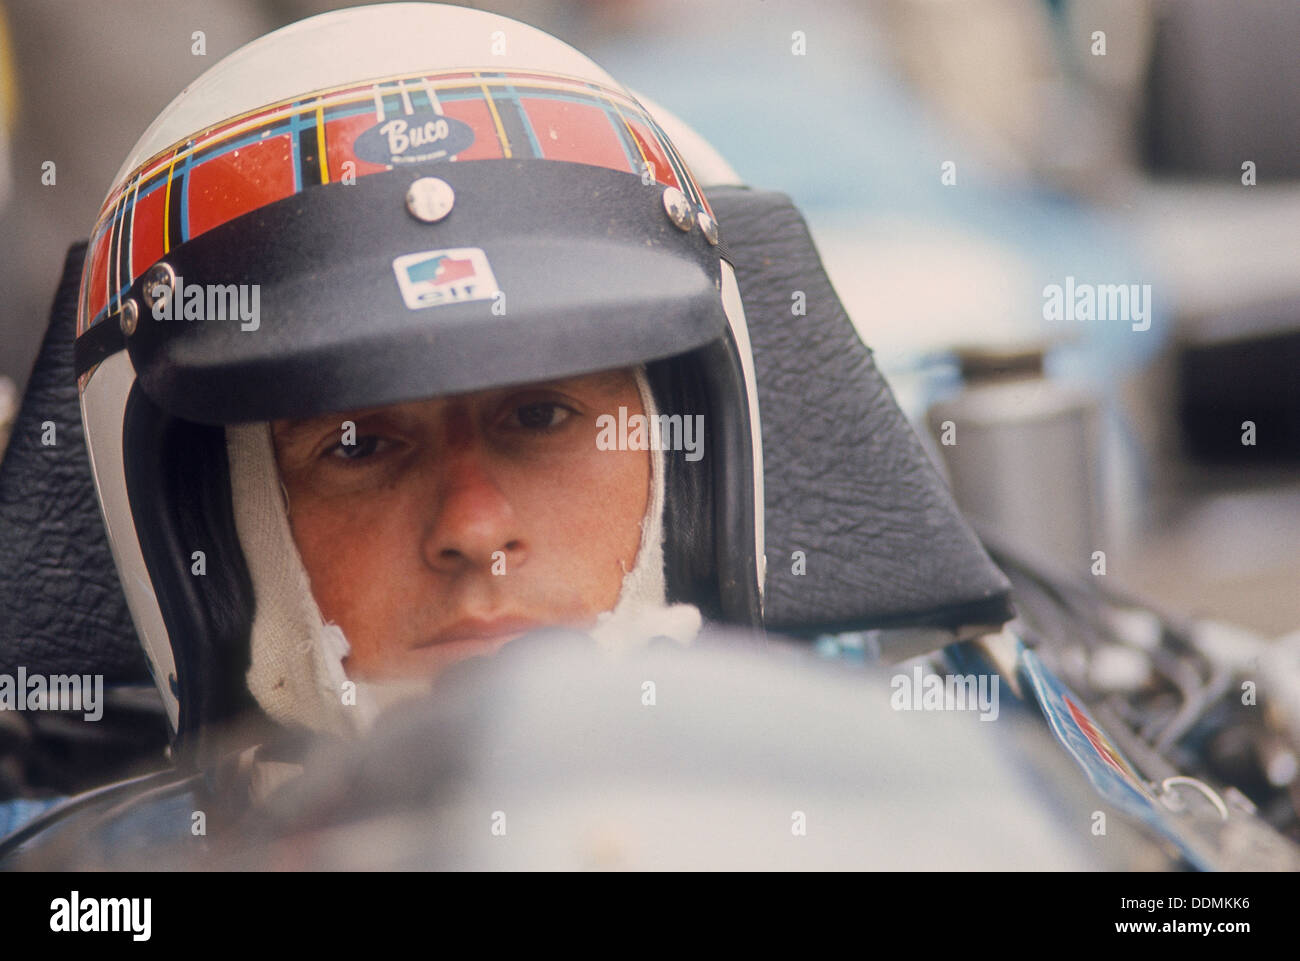 Jackie Stewart at the wheel of a racing car. Artist: Unknown Stock Photo